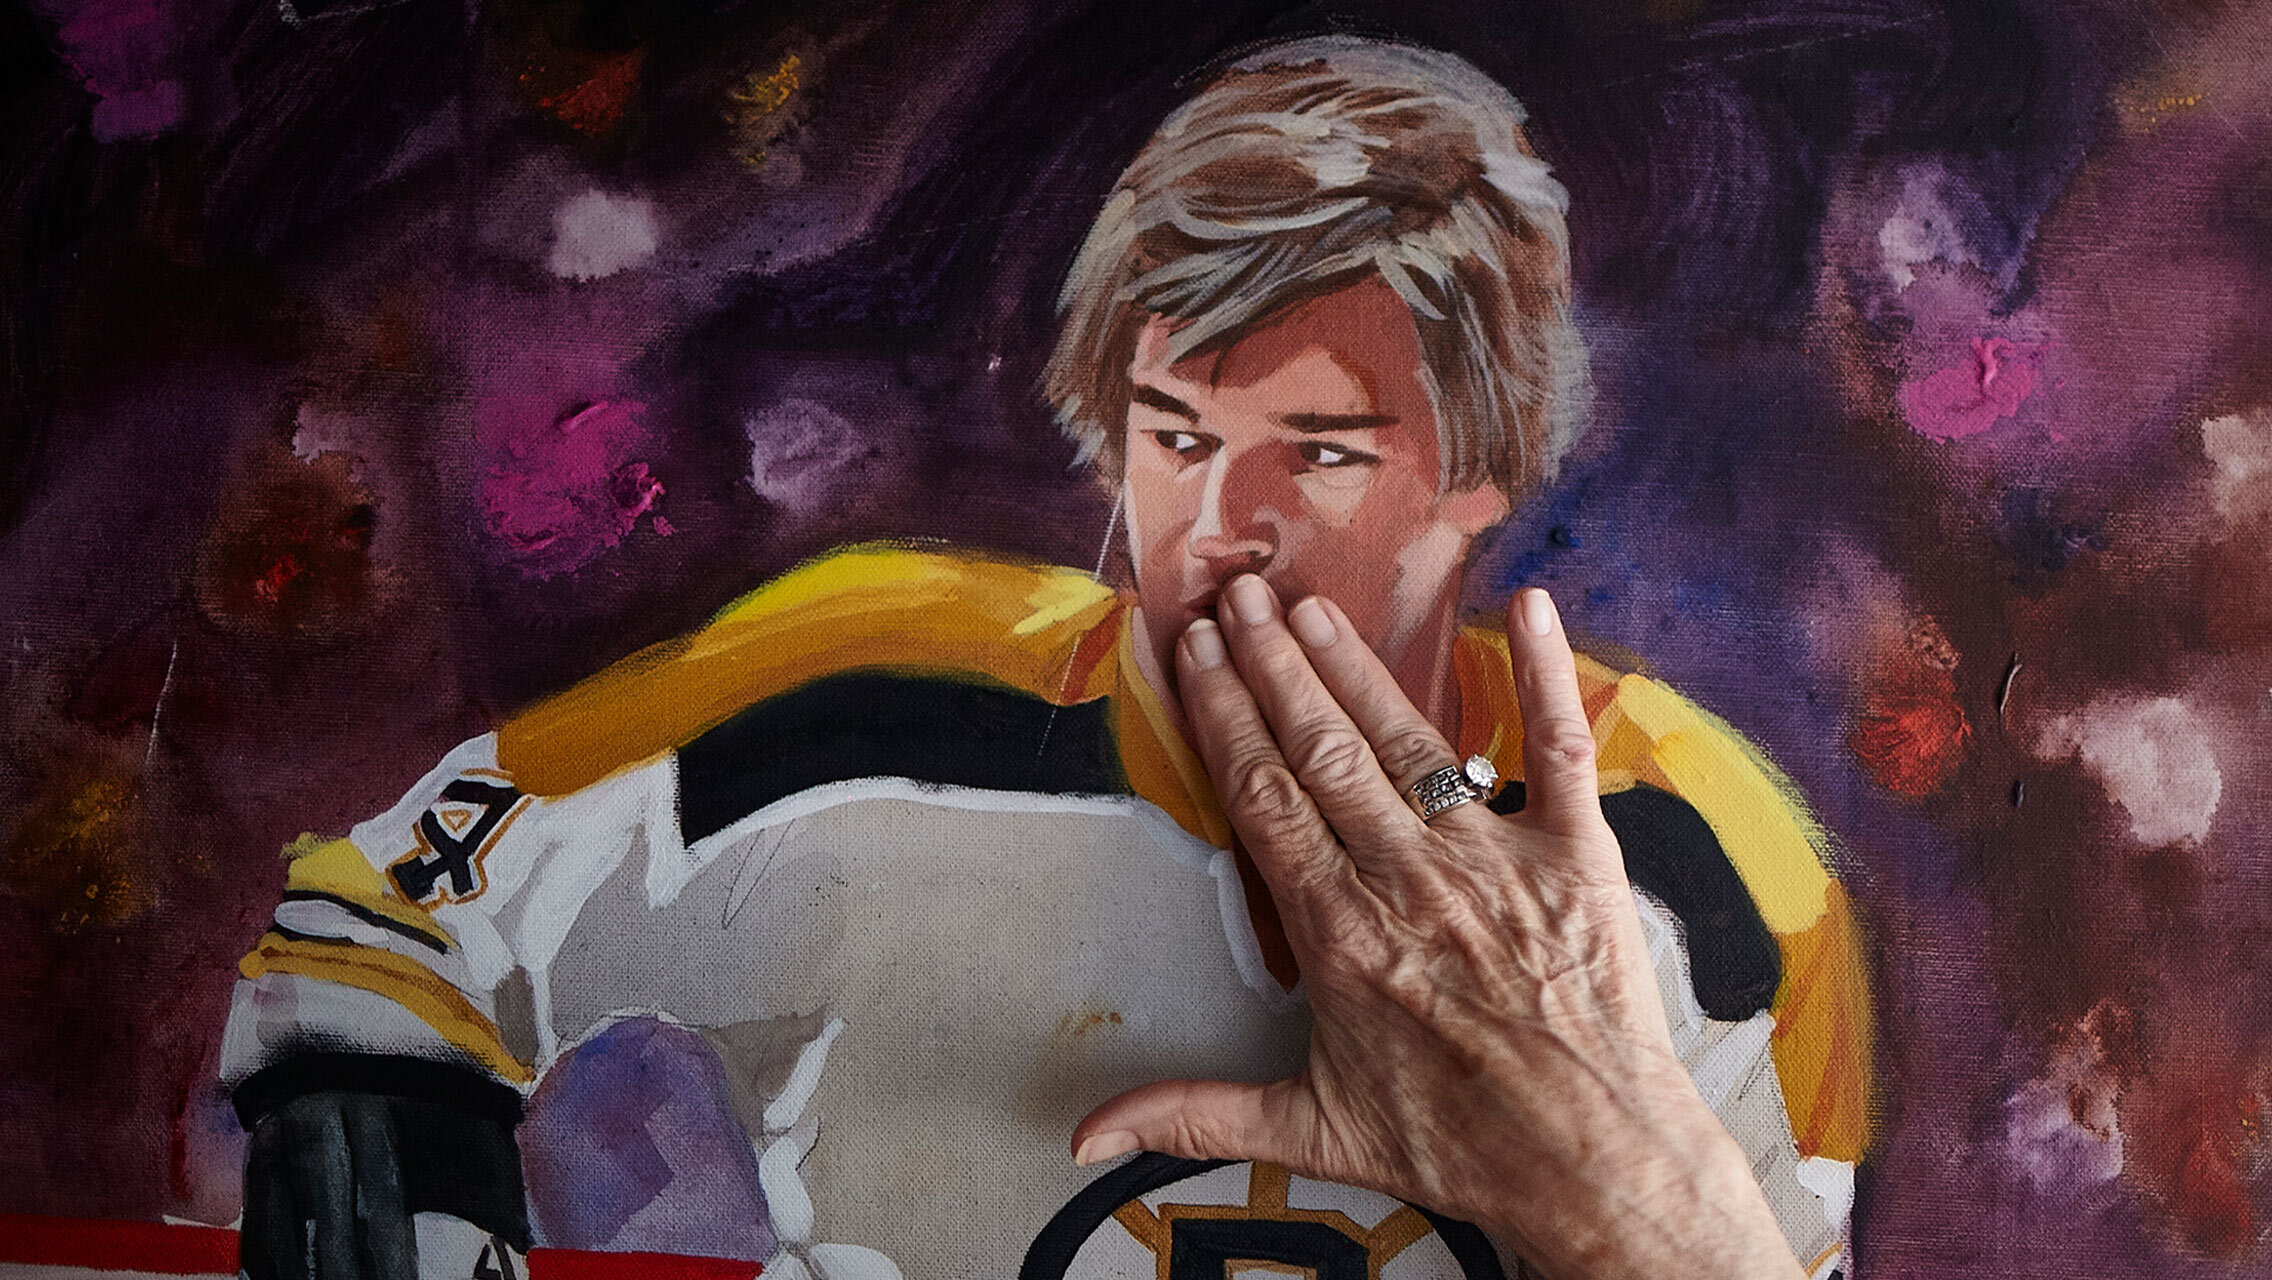 Bruins Jersey Watercolor Painting 